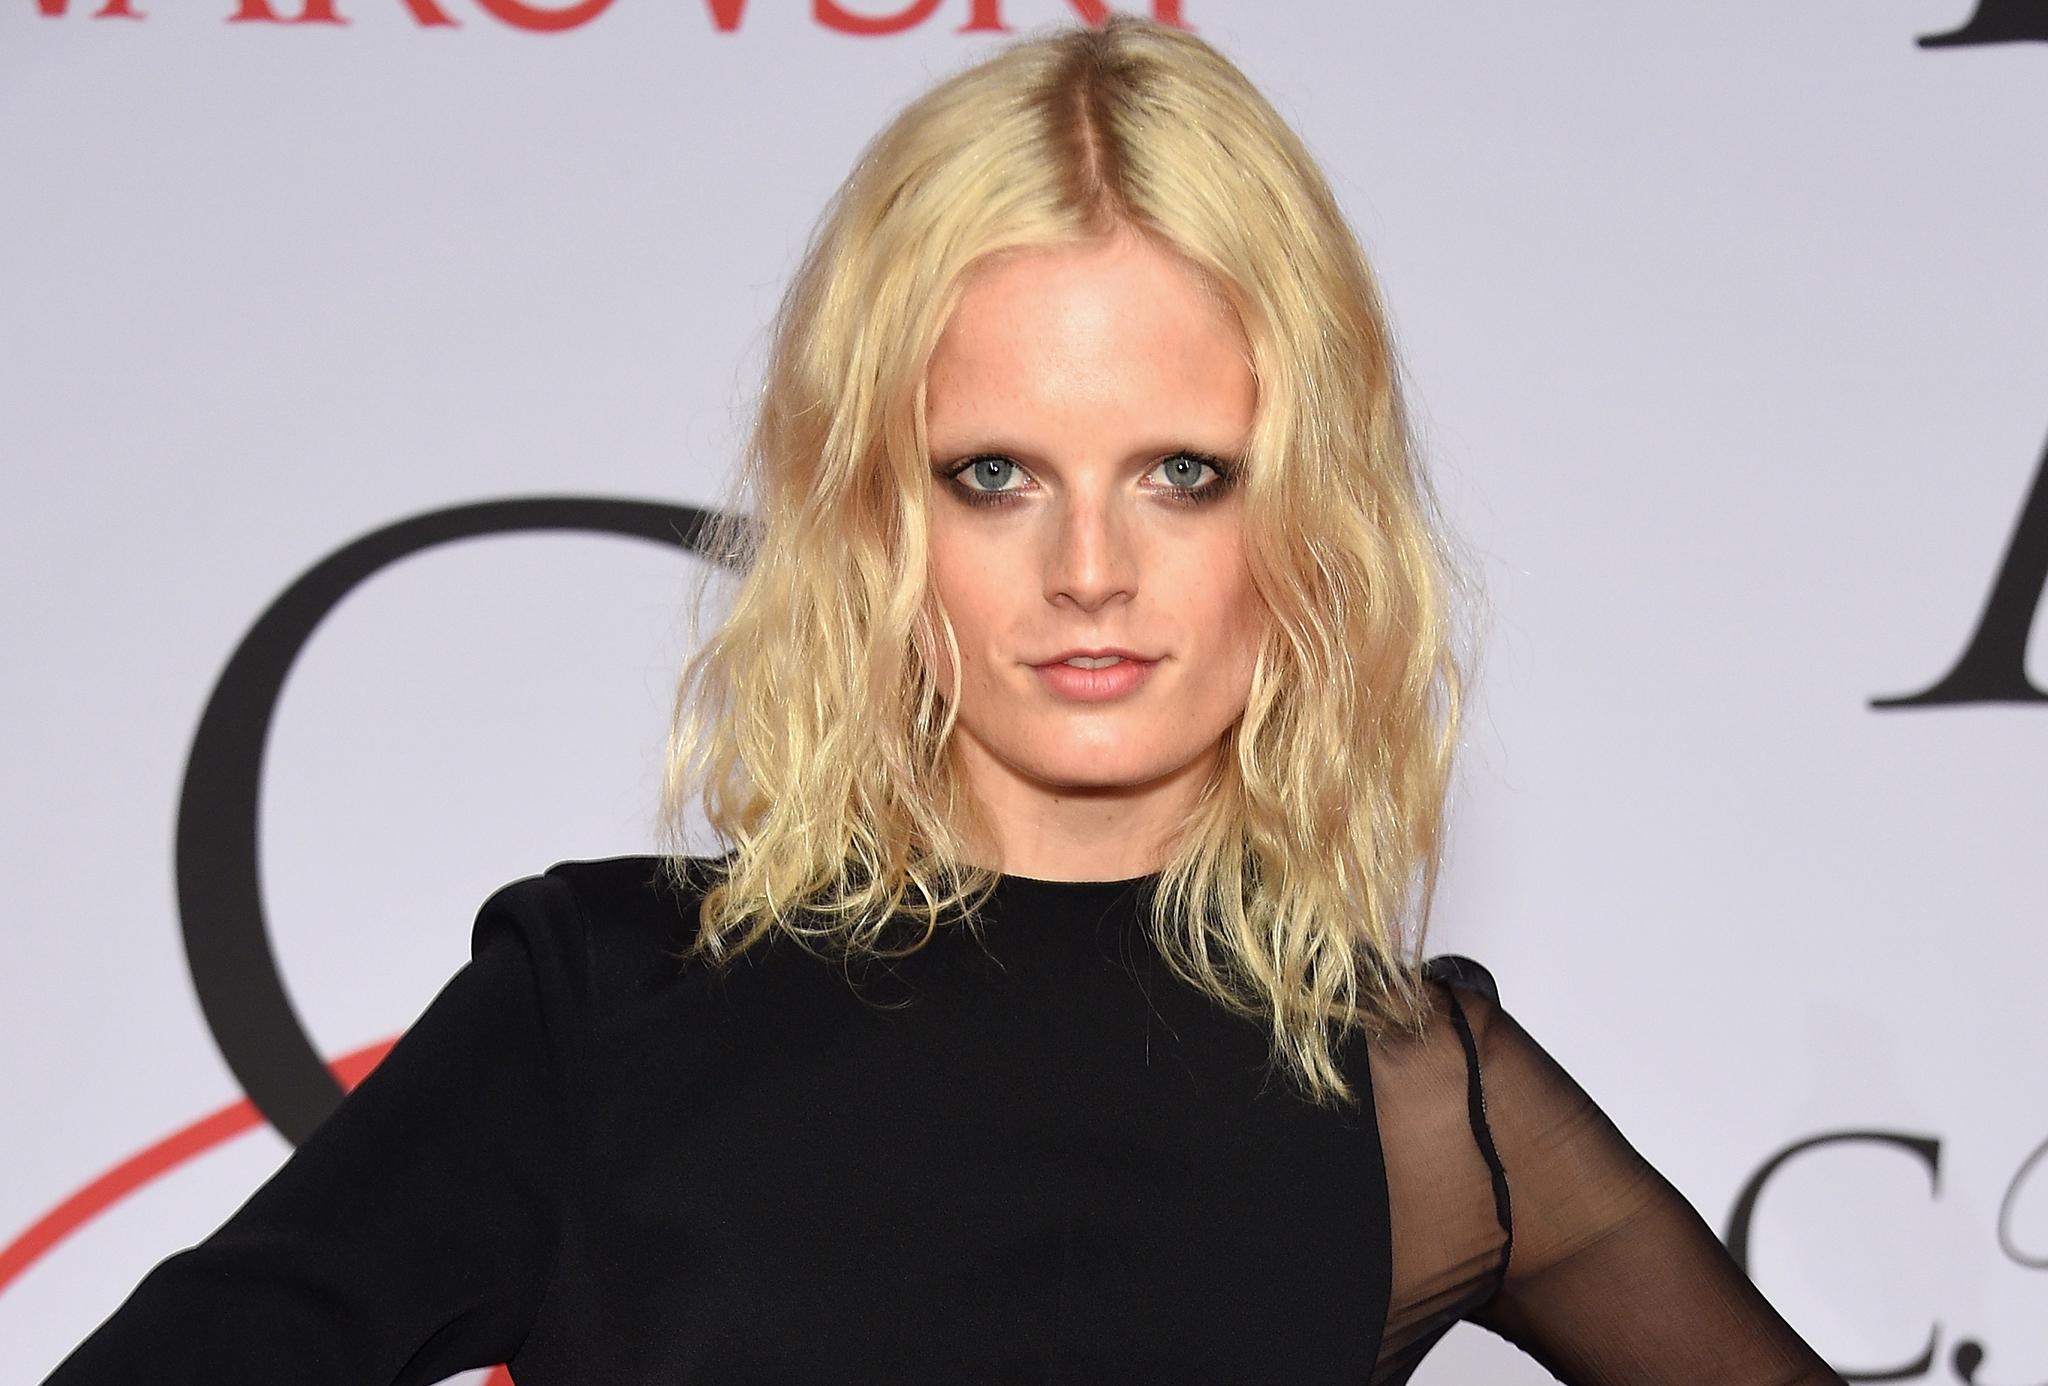 Vogue Model Hanne Gaby Odiele Comes Out As Intersex The Independent